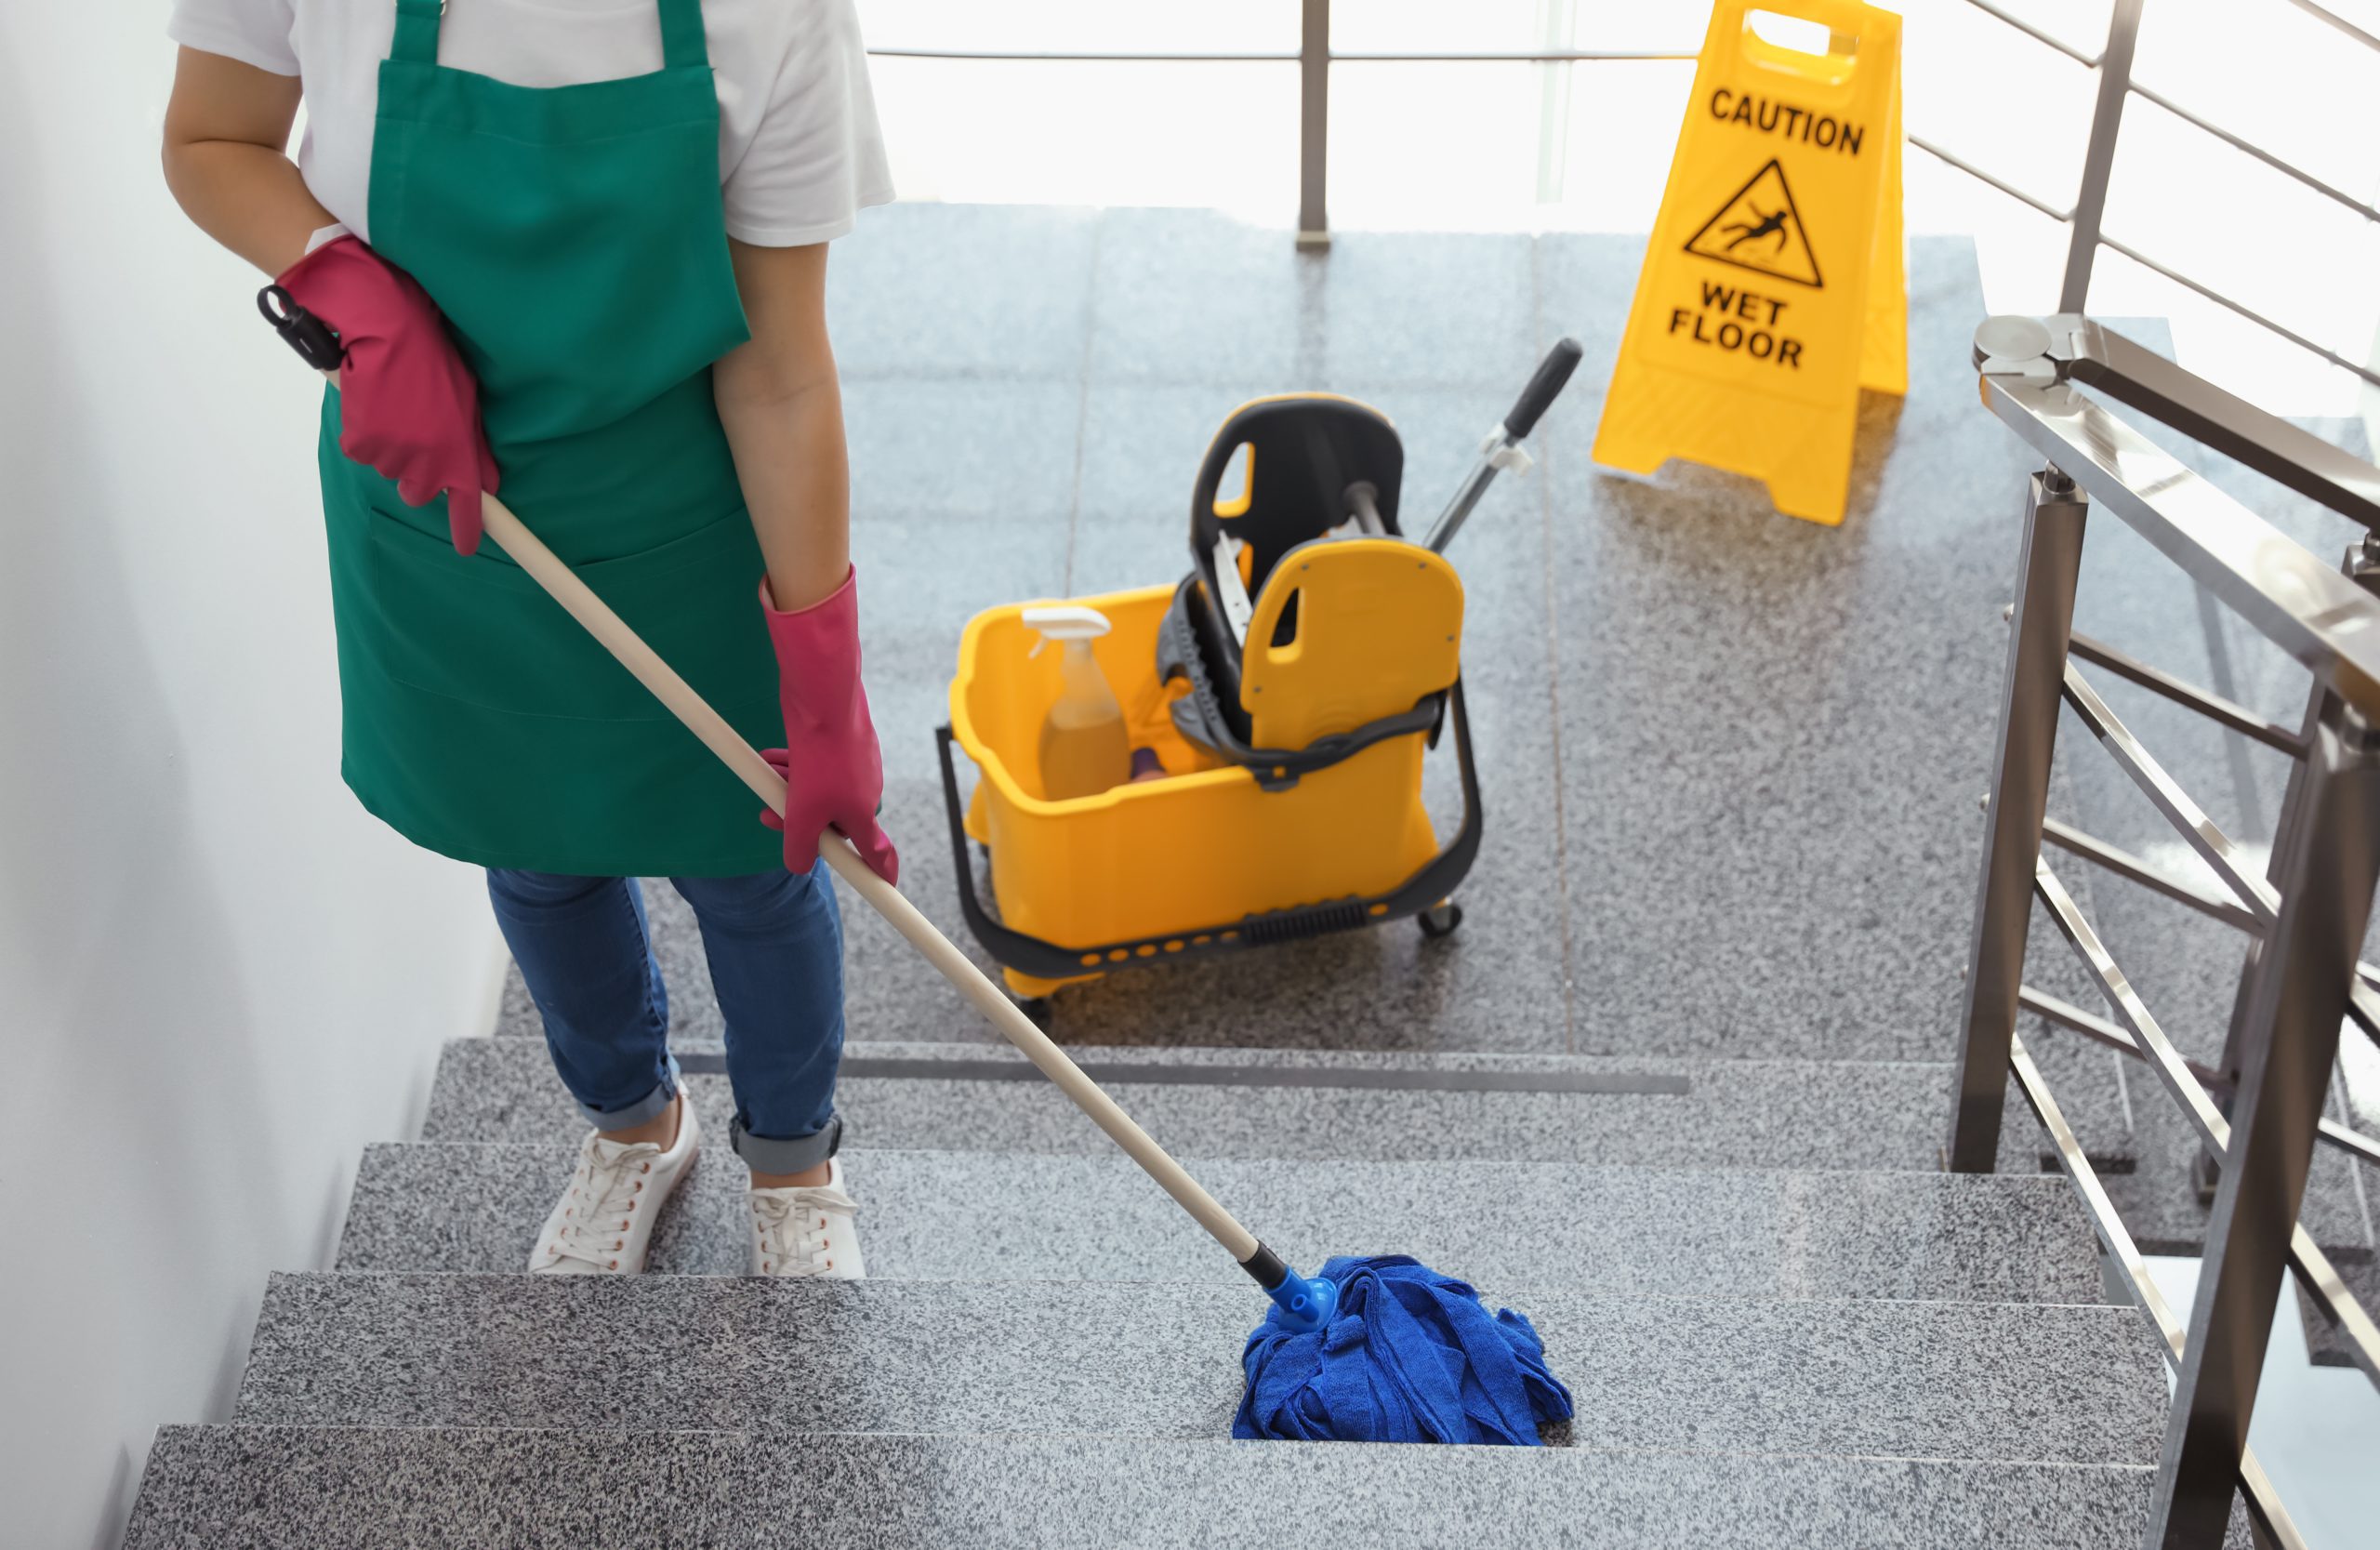 How do I schedule recurring cleaning services? faq - Cleaning Services